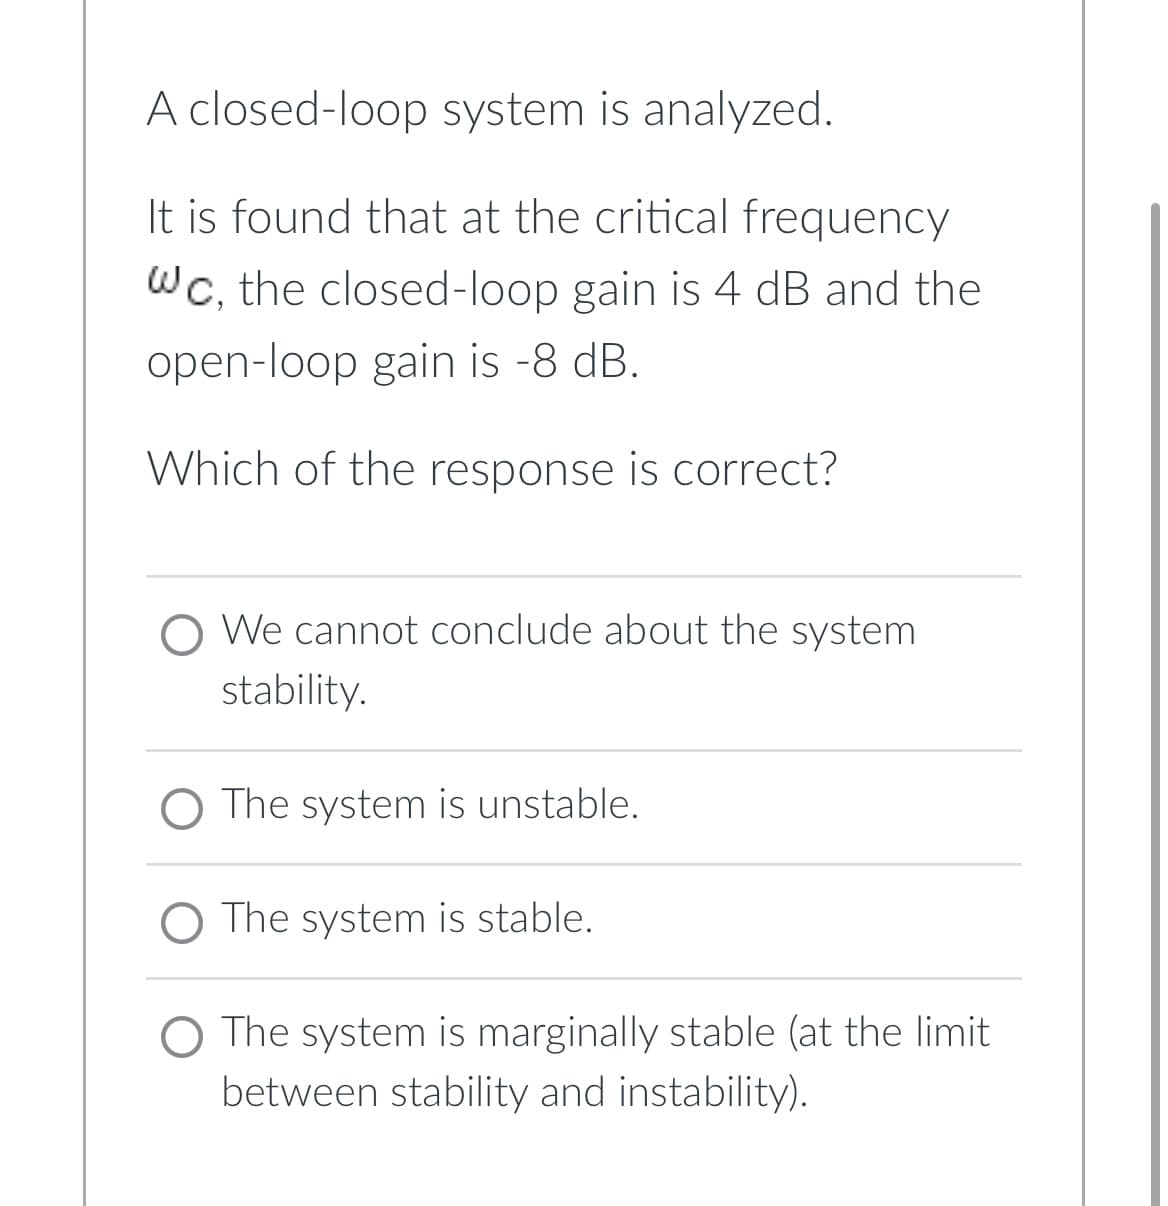 A closed-loop system is analyzed.
It is found that at the critical frequency
WC, the closed-loop gain is 4 dB and the
open-loop gain is -8 dB.
Which of the response is correct?
We cannot conclude about the system
stability.
O The system is unstable.
The system is stable.
O The system is marginally stable (at the limit
between stability and instability).